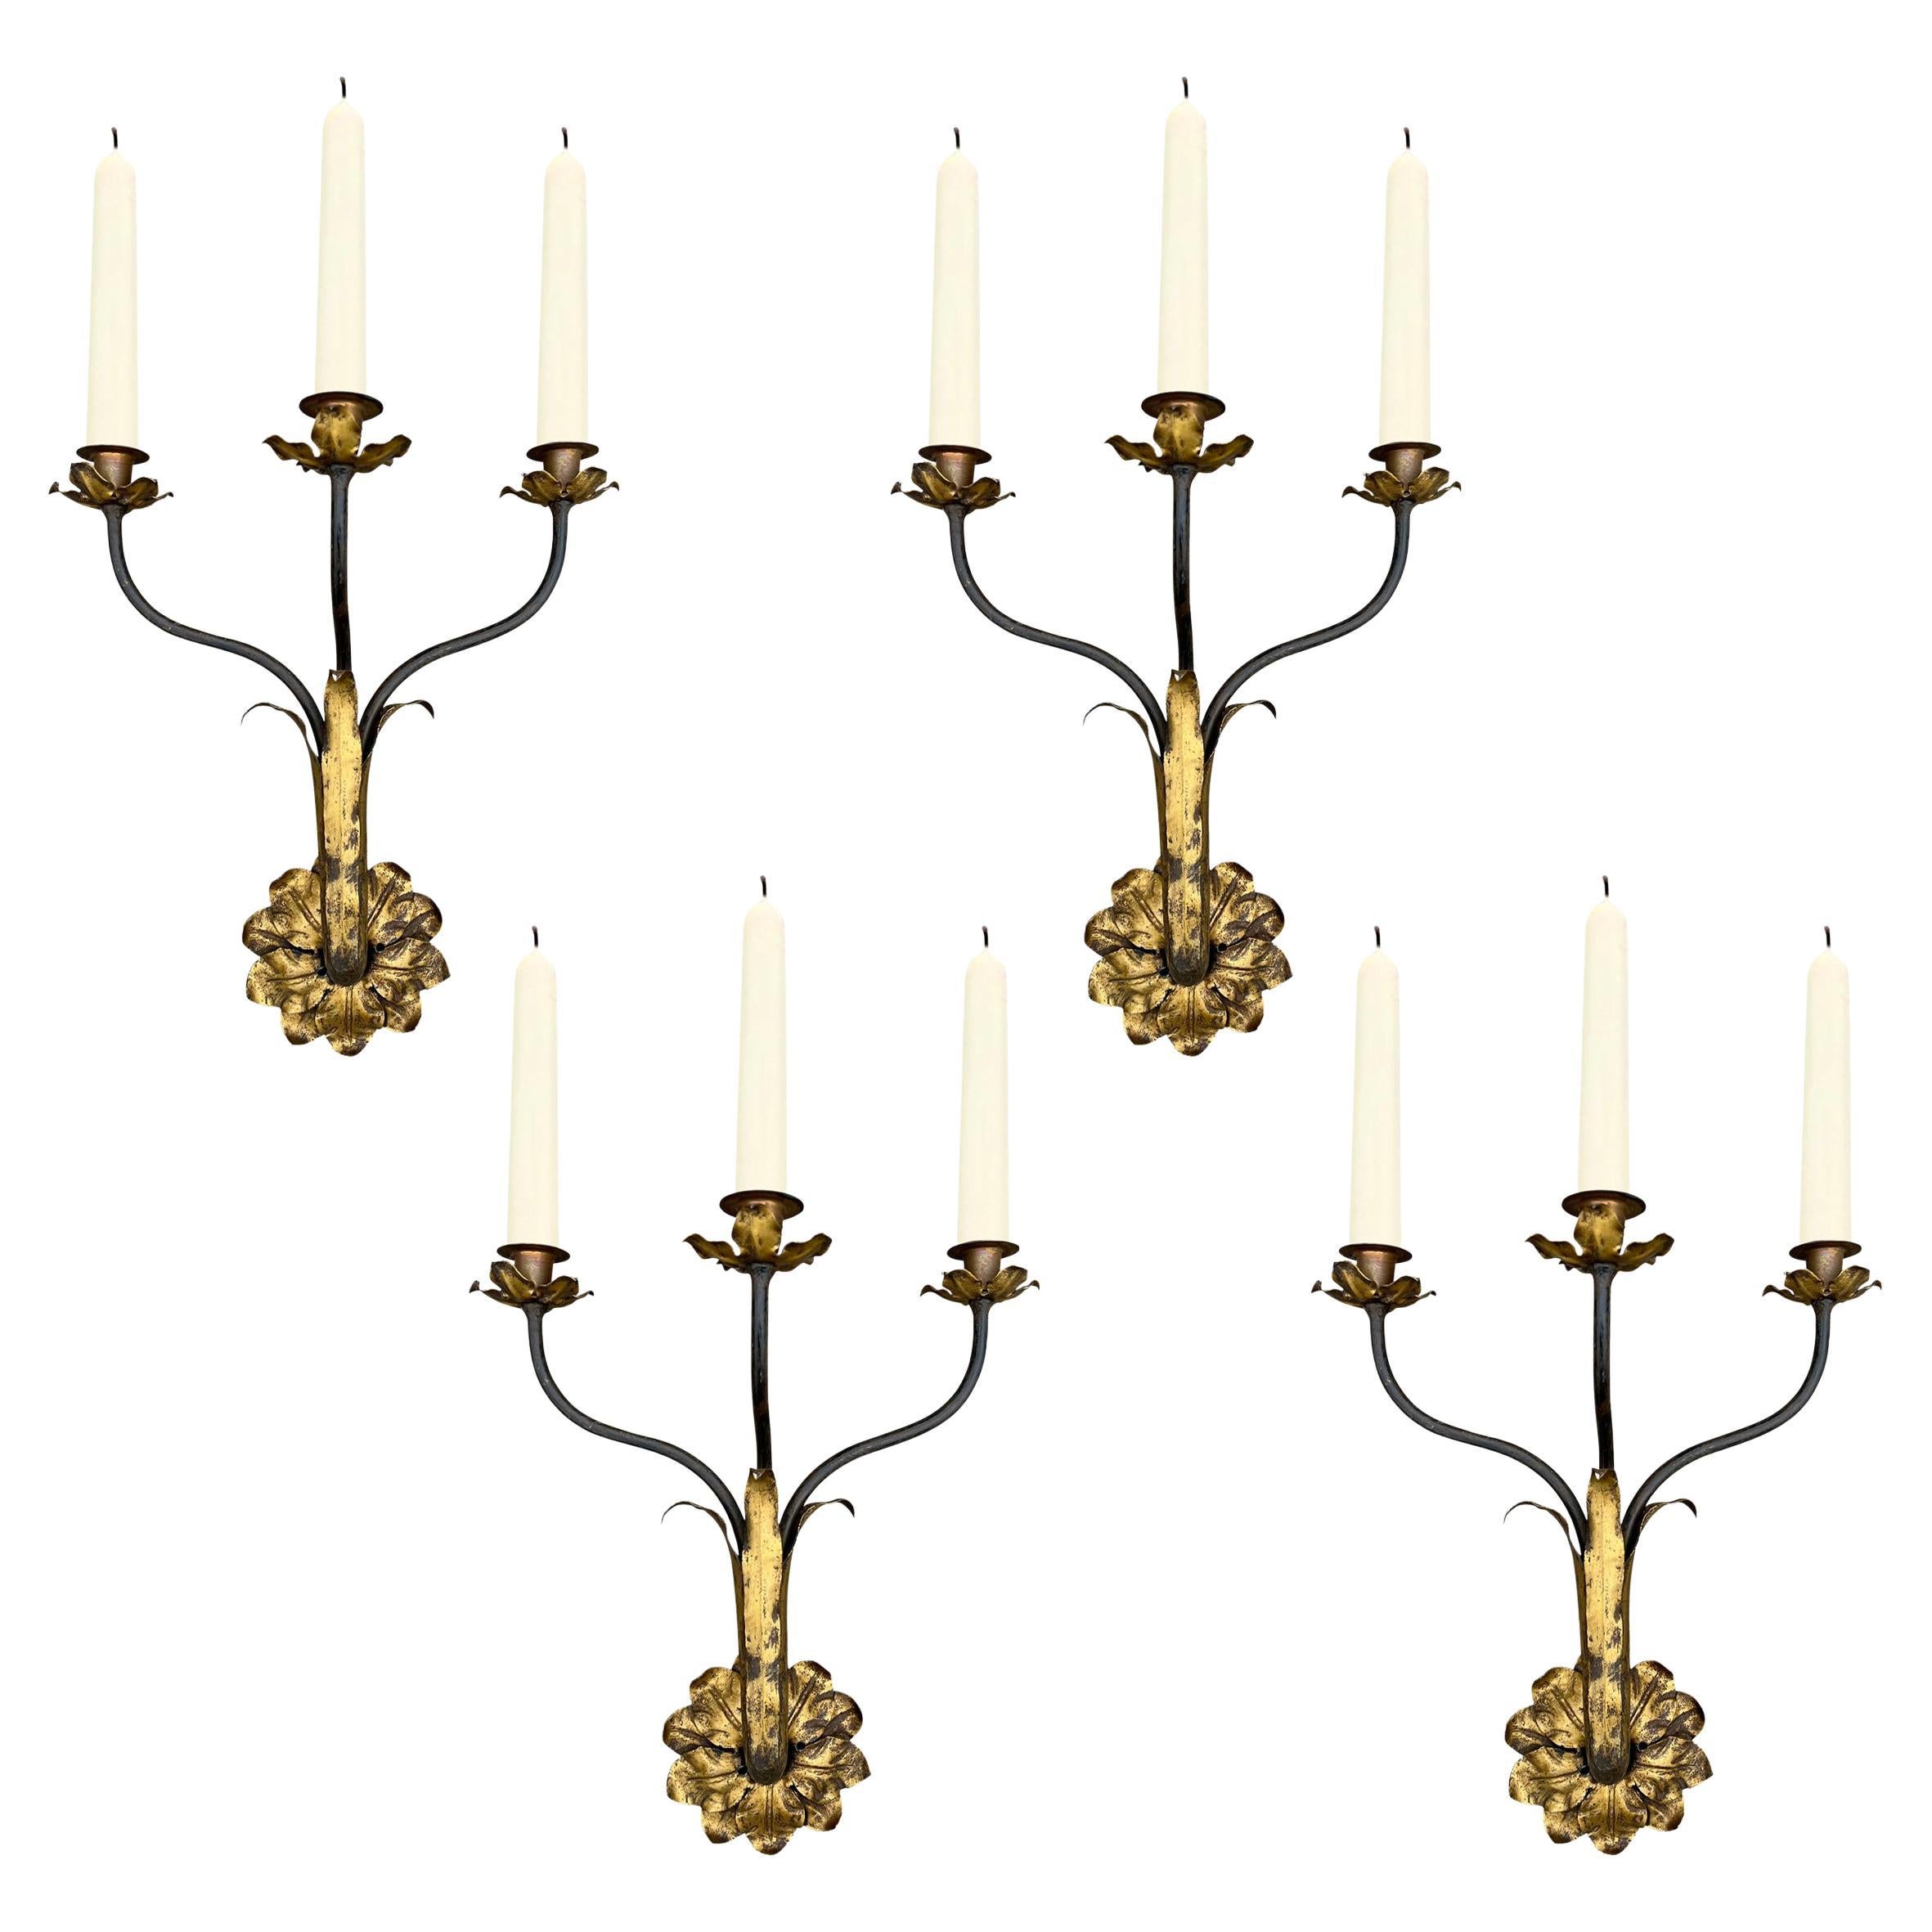 Set of Four Early 20th Century Italian Gilt Iron Candle Sconces For Sale